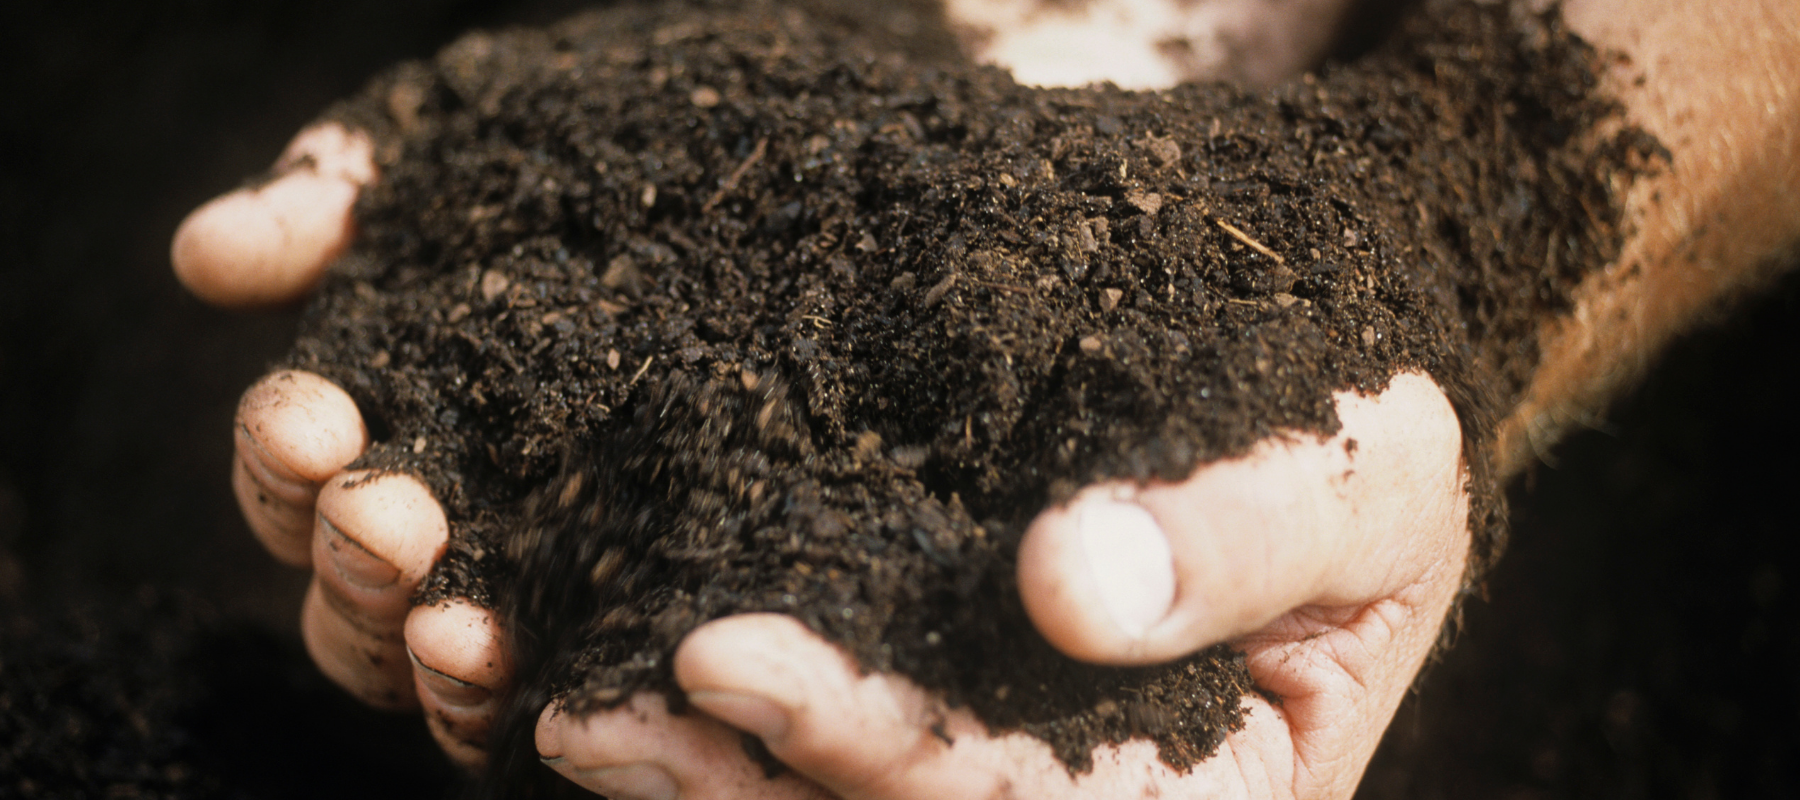 What is soil structure and why is it important?